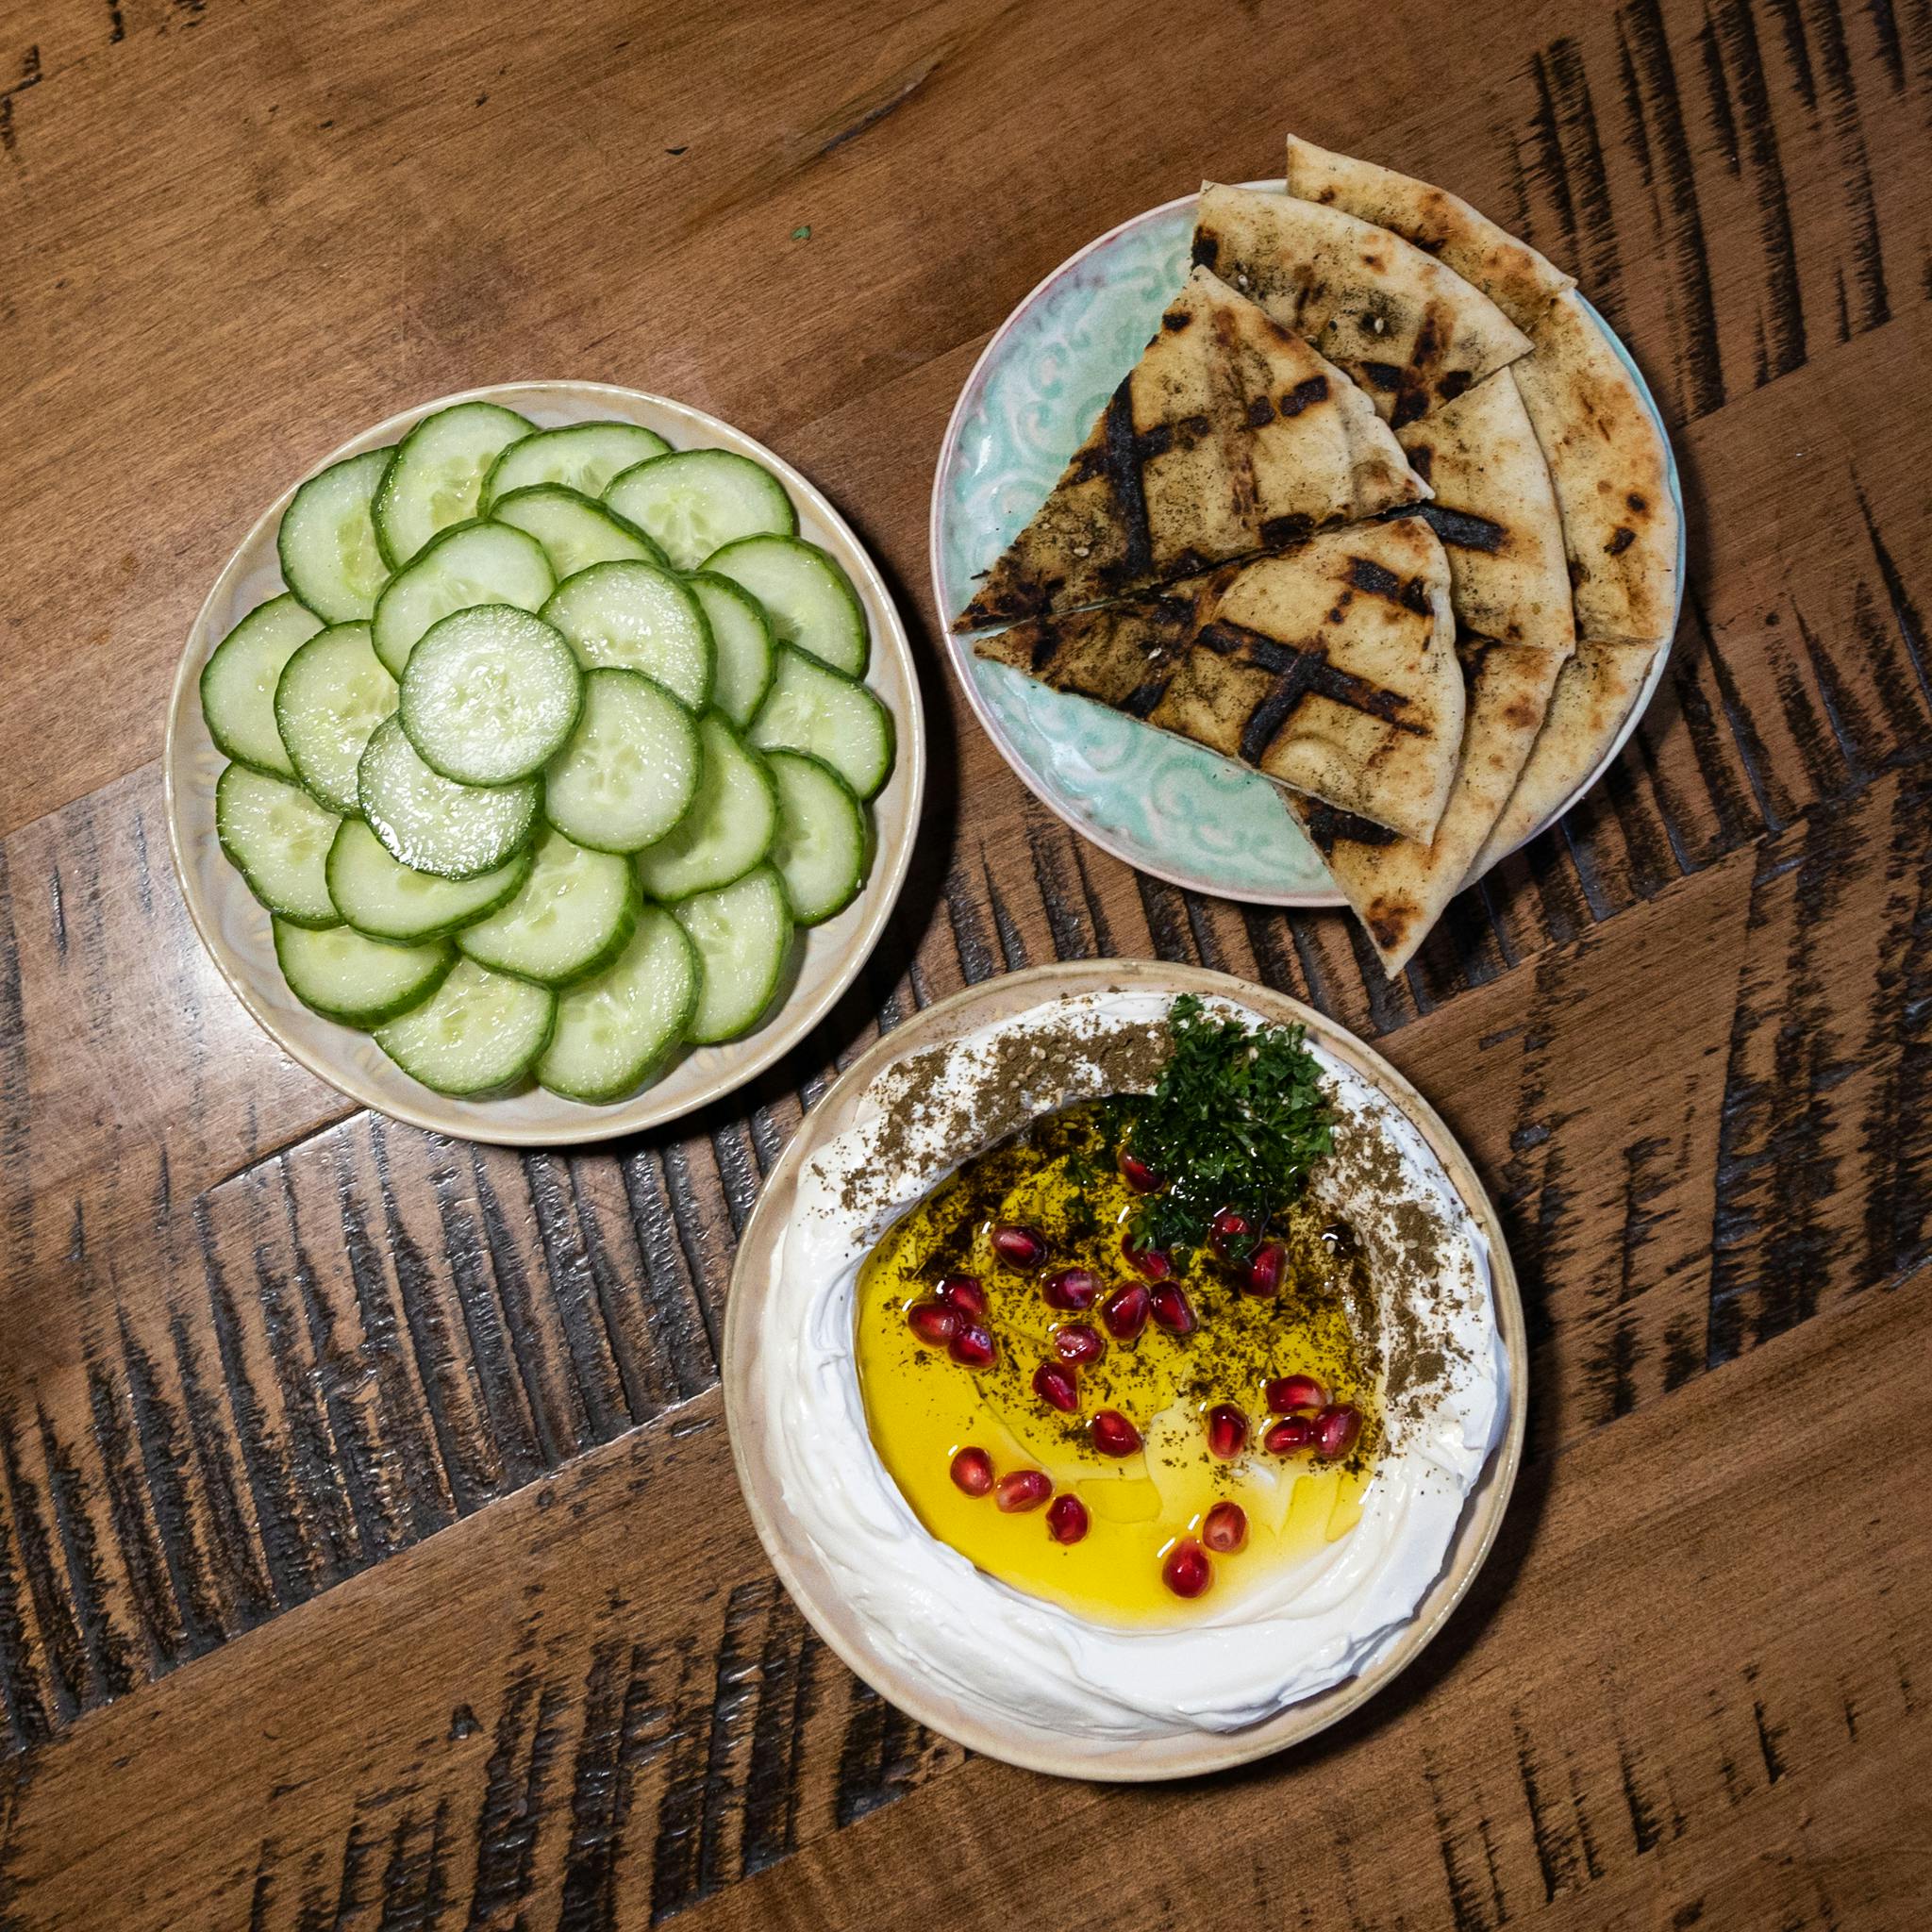 Labneh, spiced pita, and fresh cucumbers